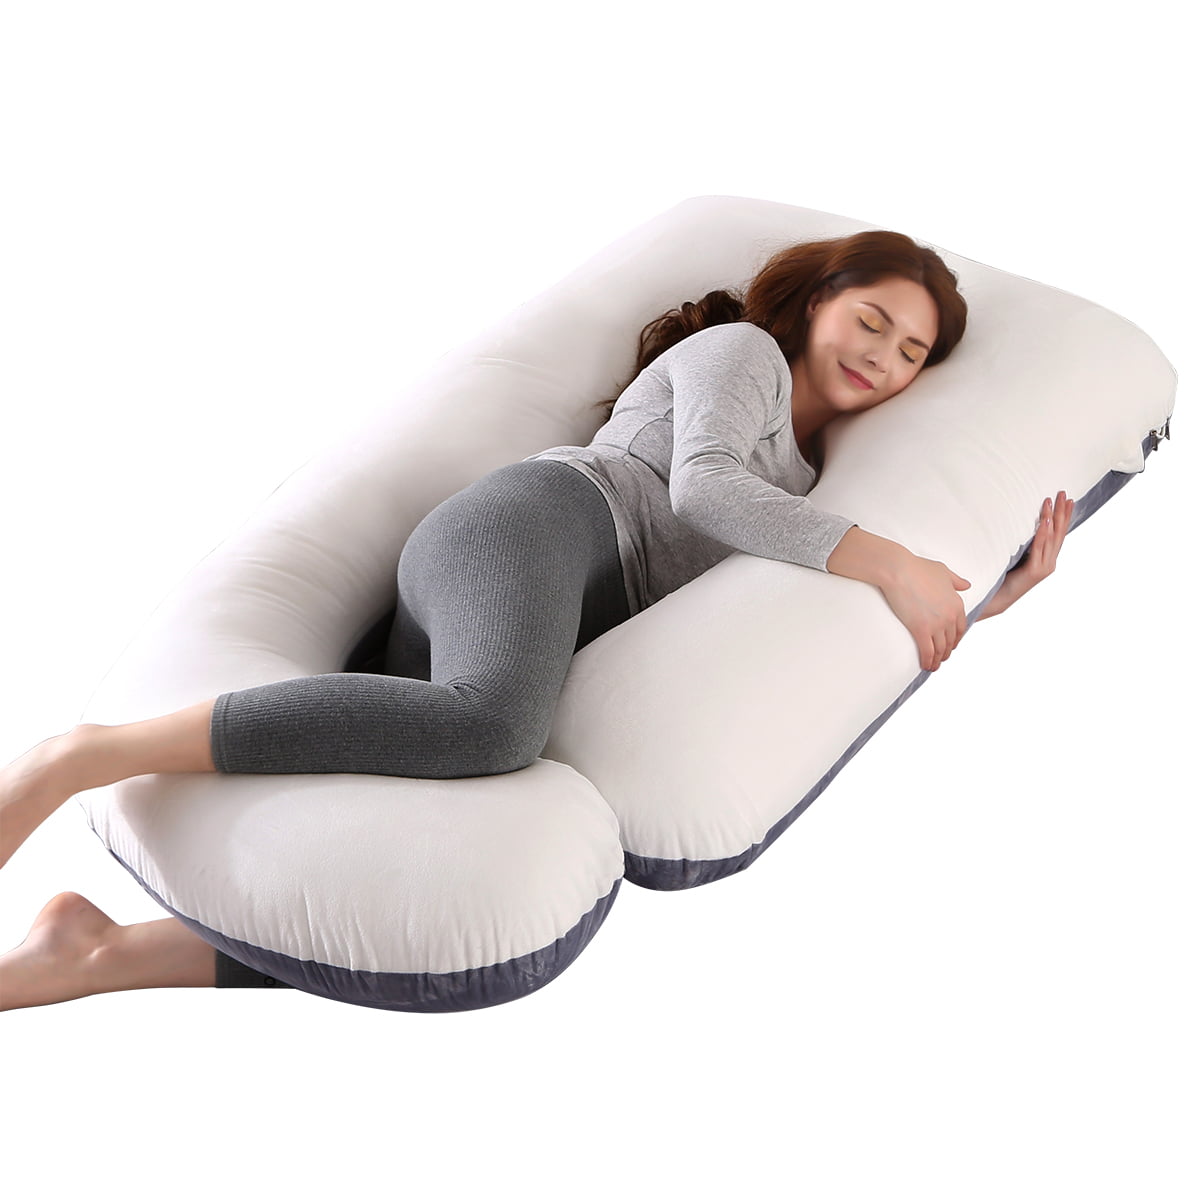 Pregnancy Pillow J Shaped Portable Pregnancy Full Body Side Sleeping Pillow Support Body Pillow for Maternity Pillow Support for Pregnant Women Breast Feeding Pillow,A 